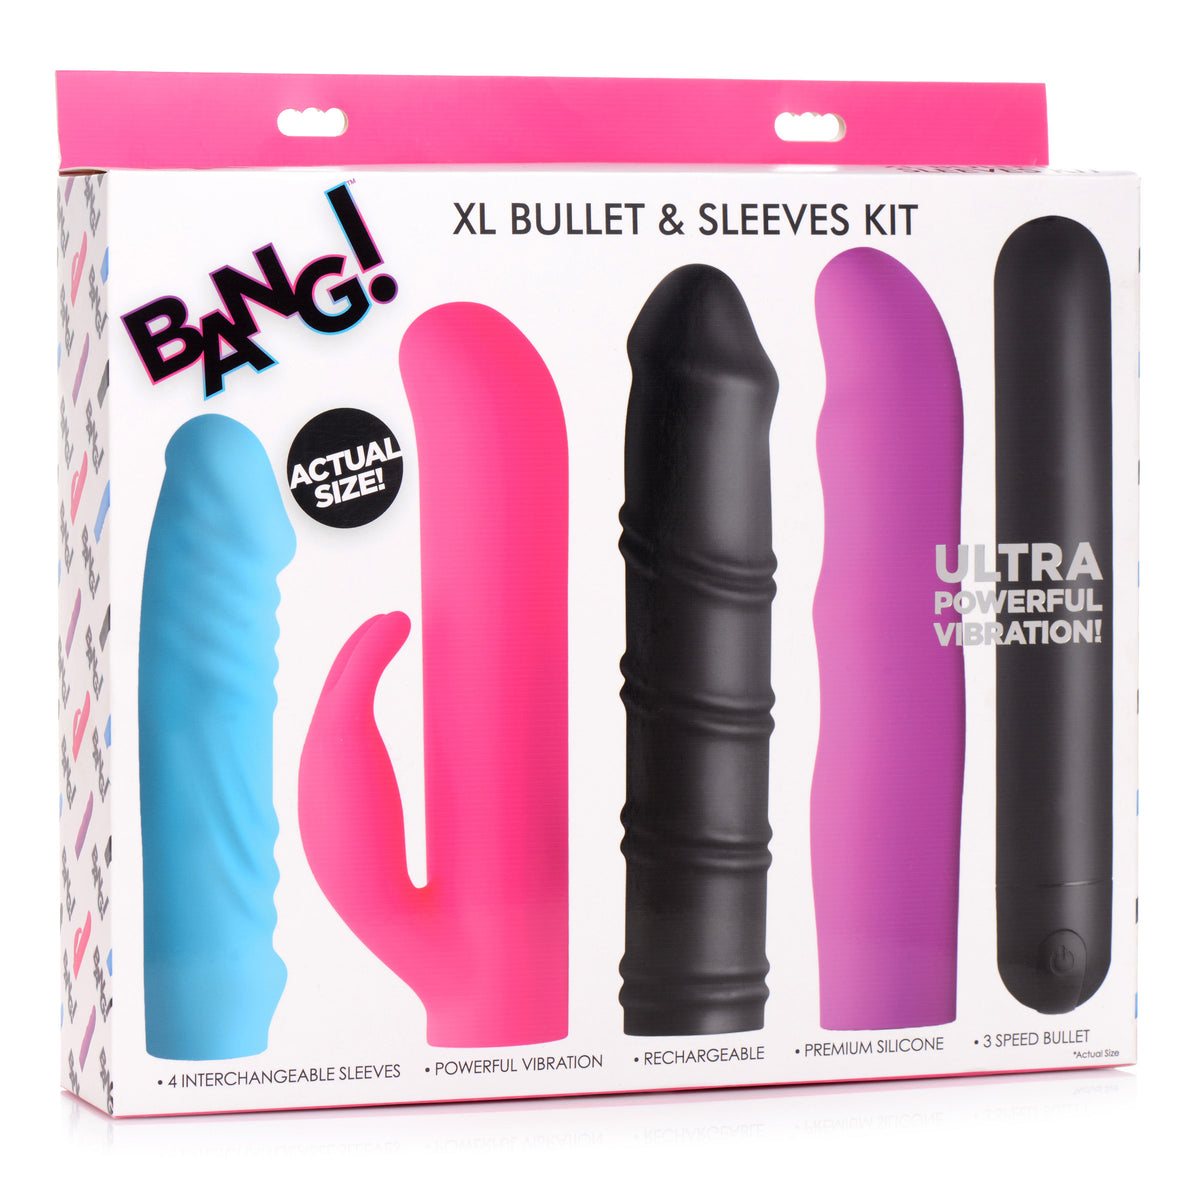 3 Speed 4-in-1 XL Bullet and Sleeves Kit